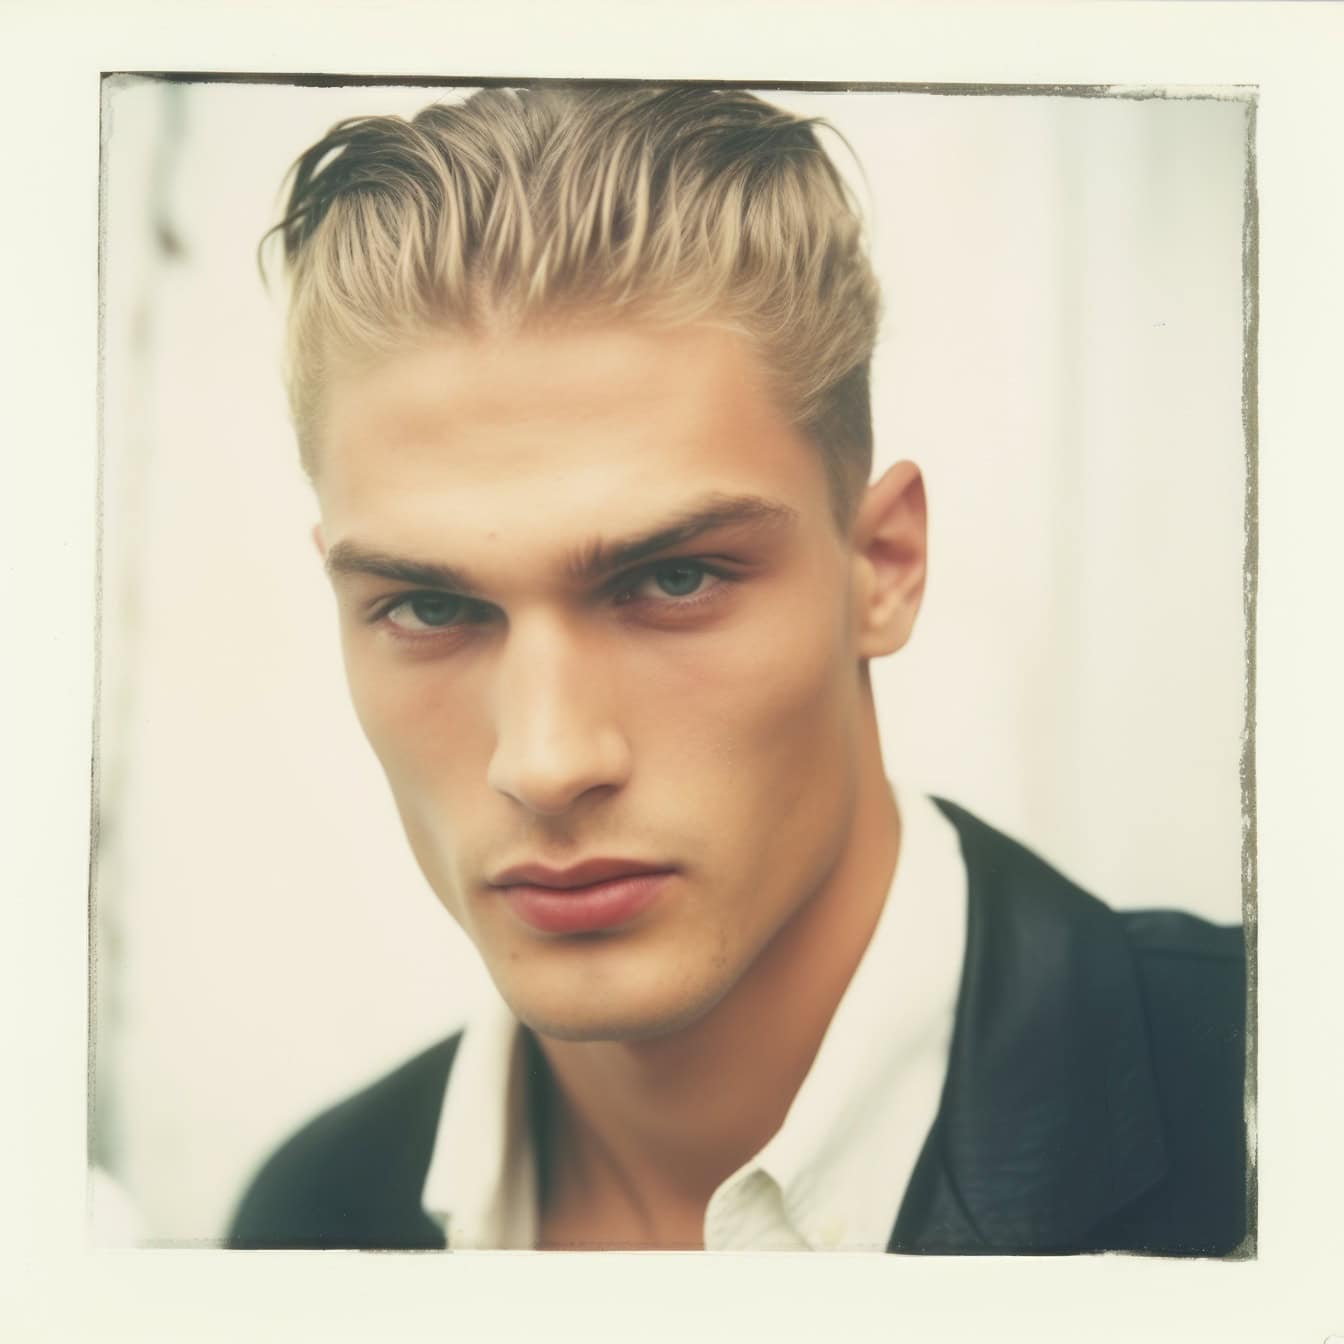 Old faded polaroid photo of a very handsome man photo model with blonde hair